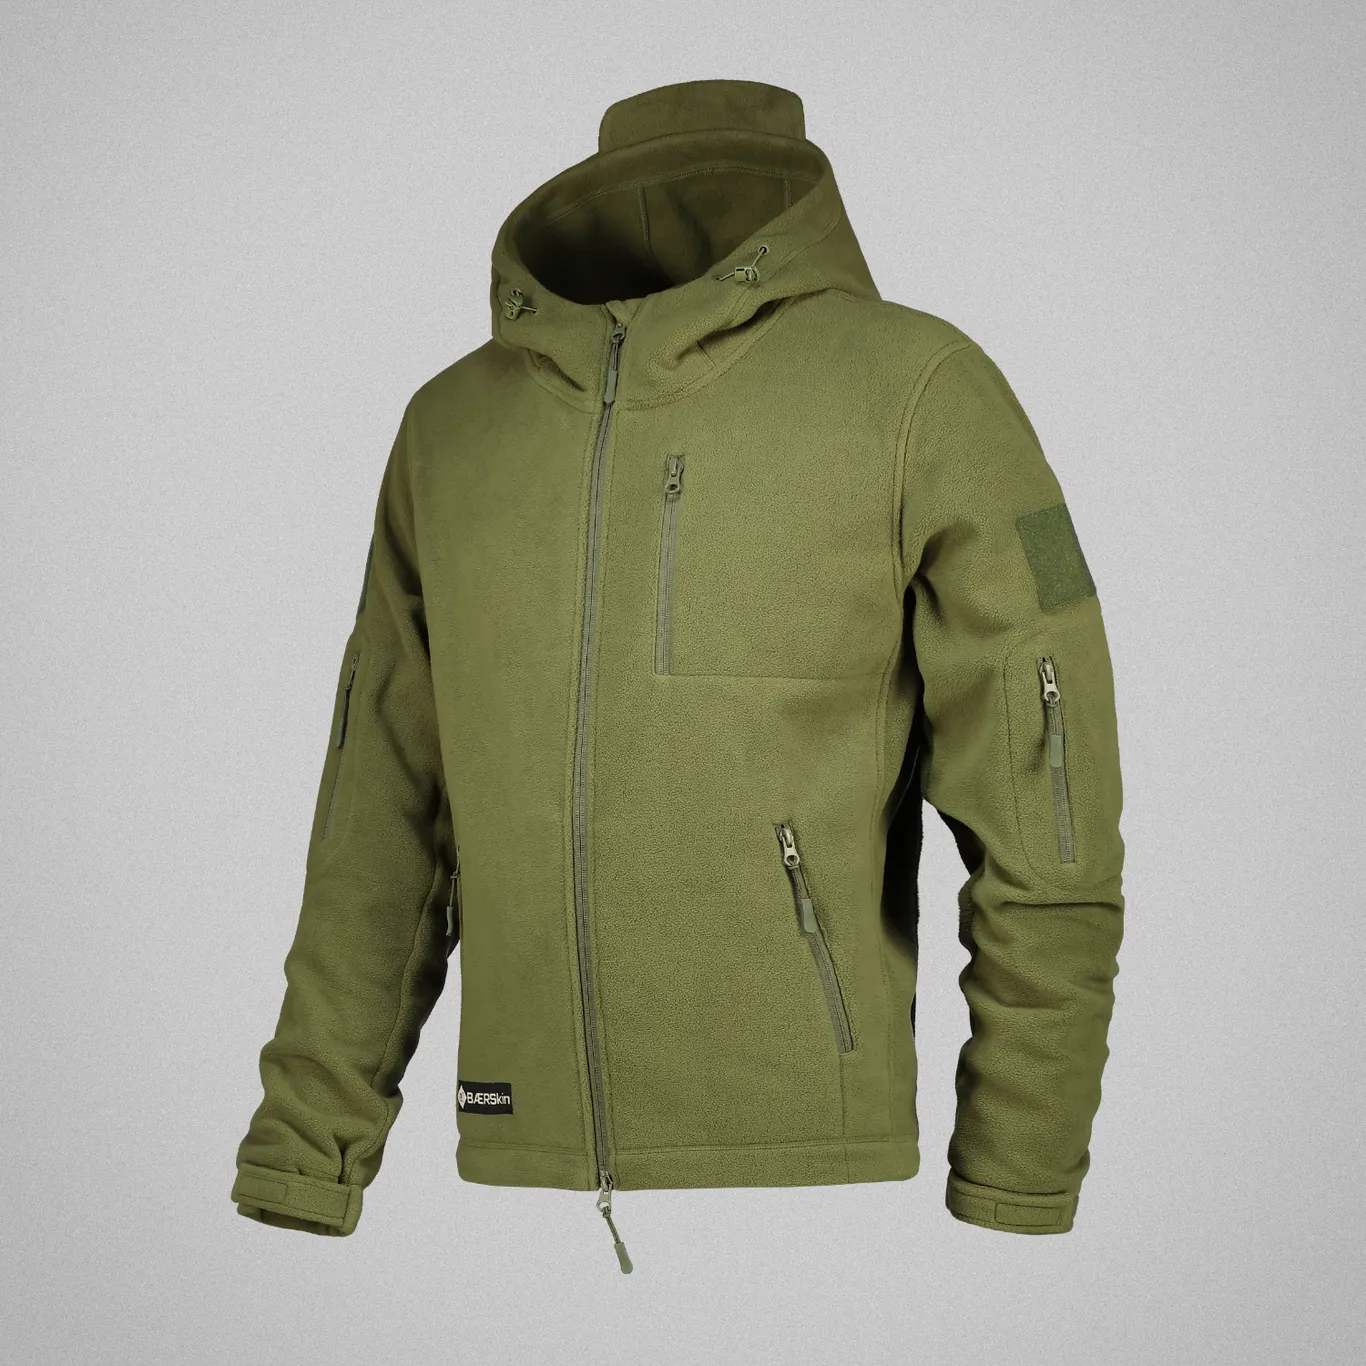 You are currently viewing Baerskin Hoodie Review – Are Baerskin Hoodies Any Good?